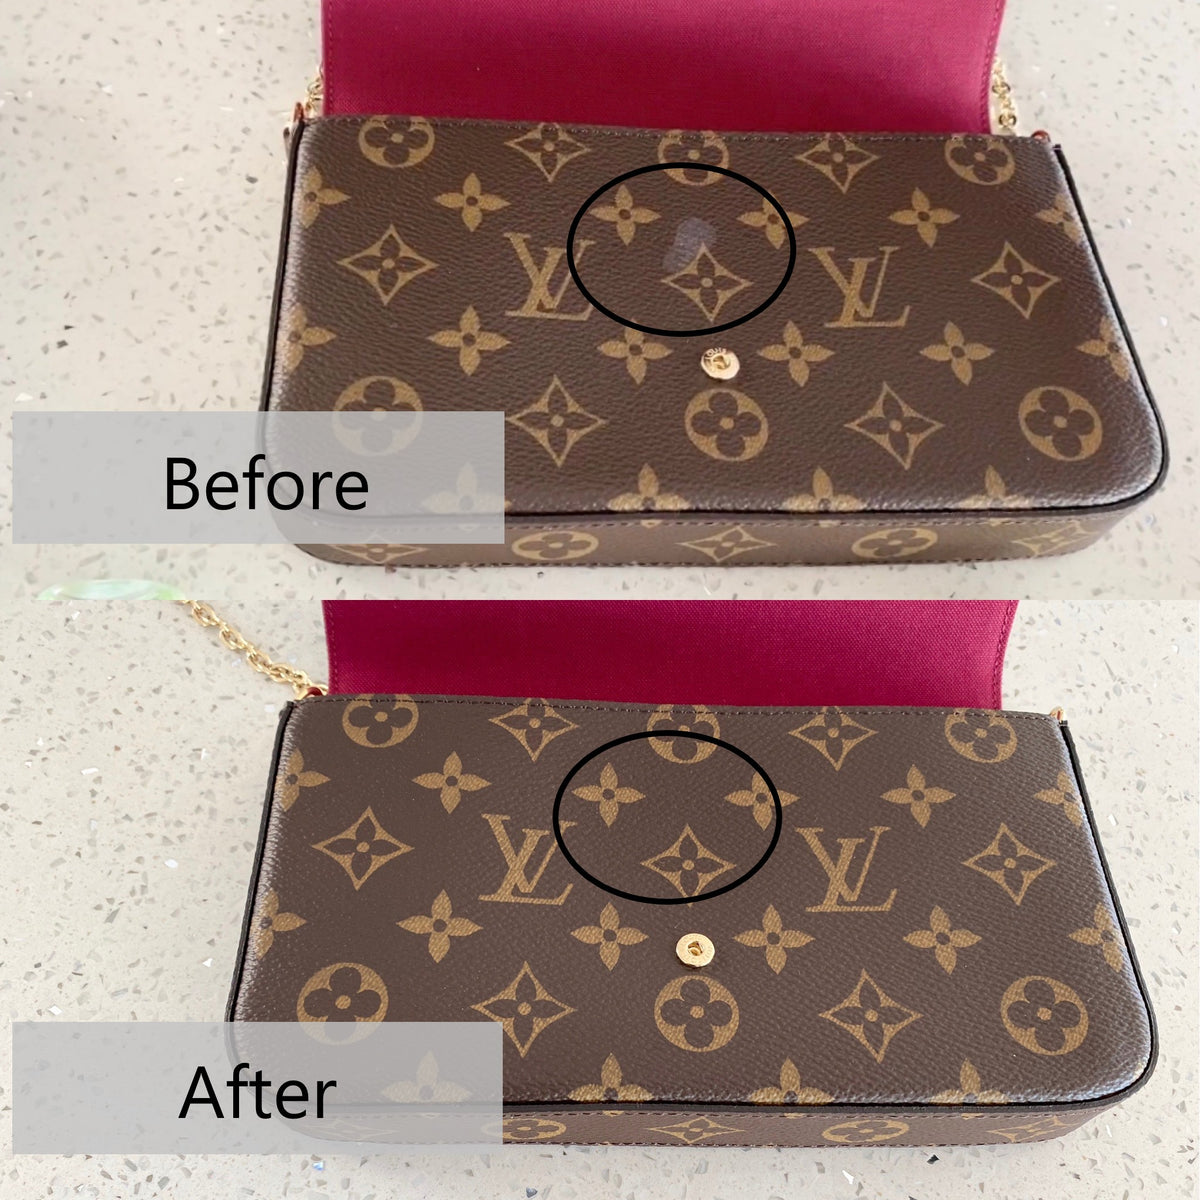 VLOG* Cleaning my Monogram Louis Vuitton Handbags & How You Can